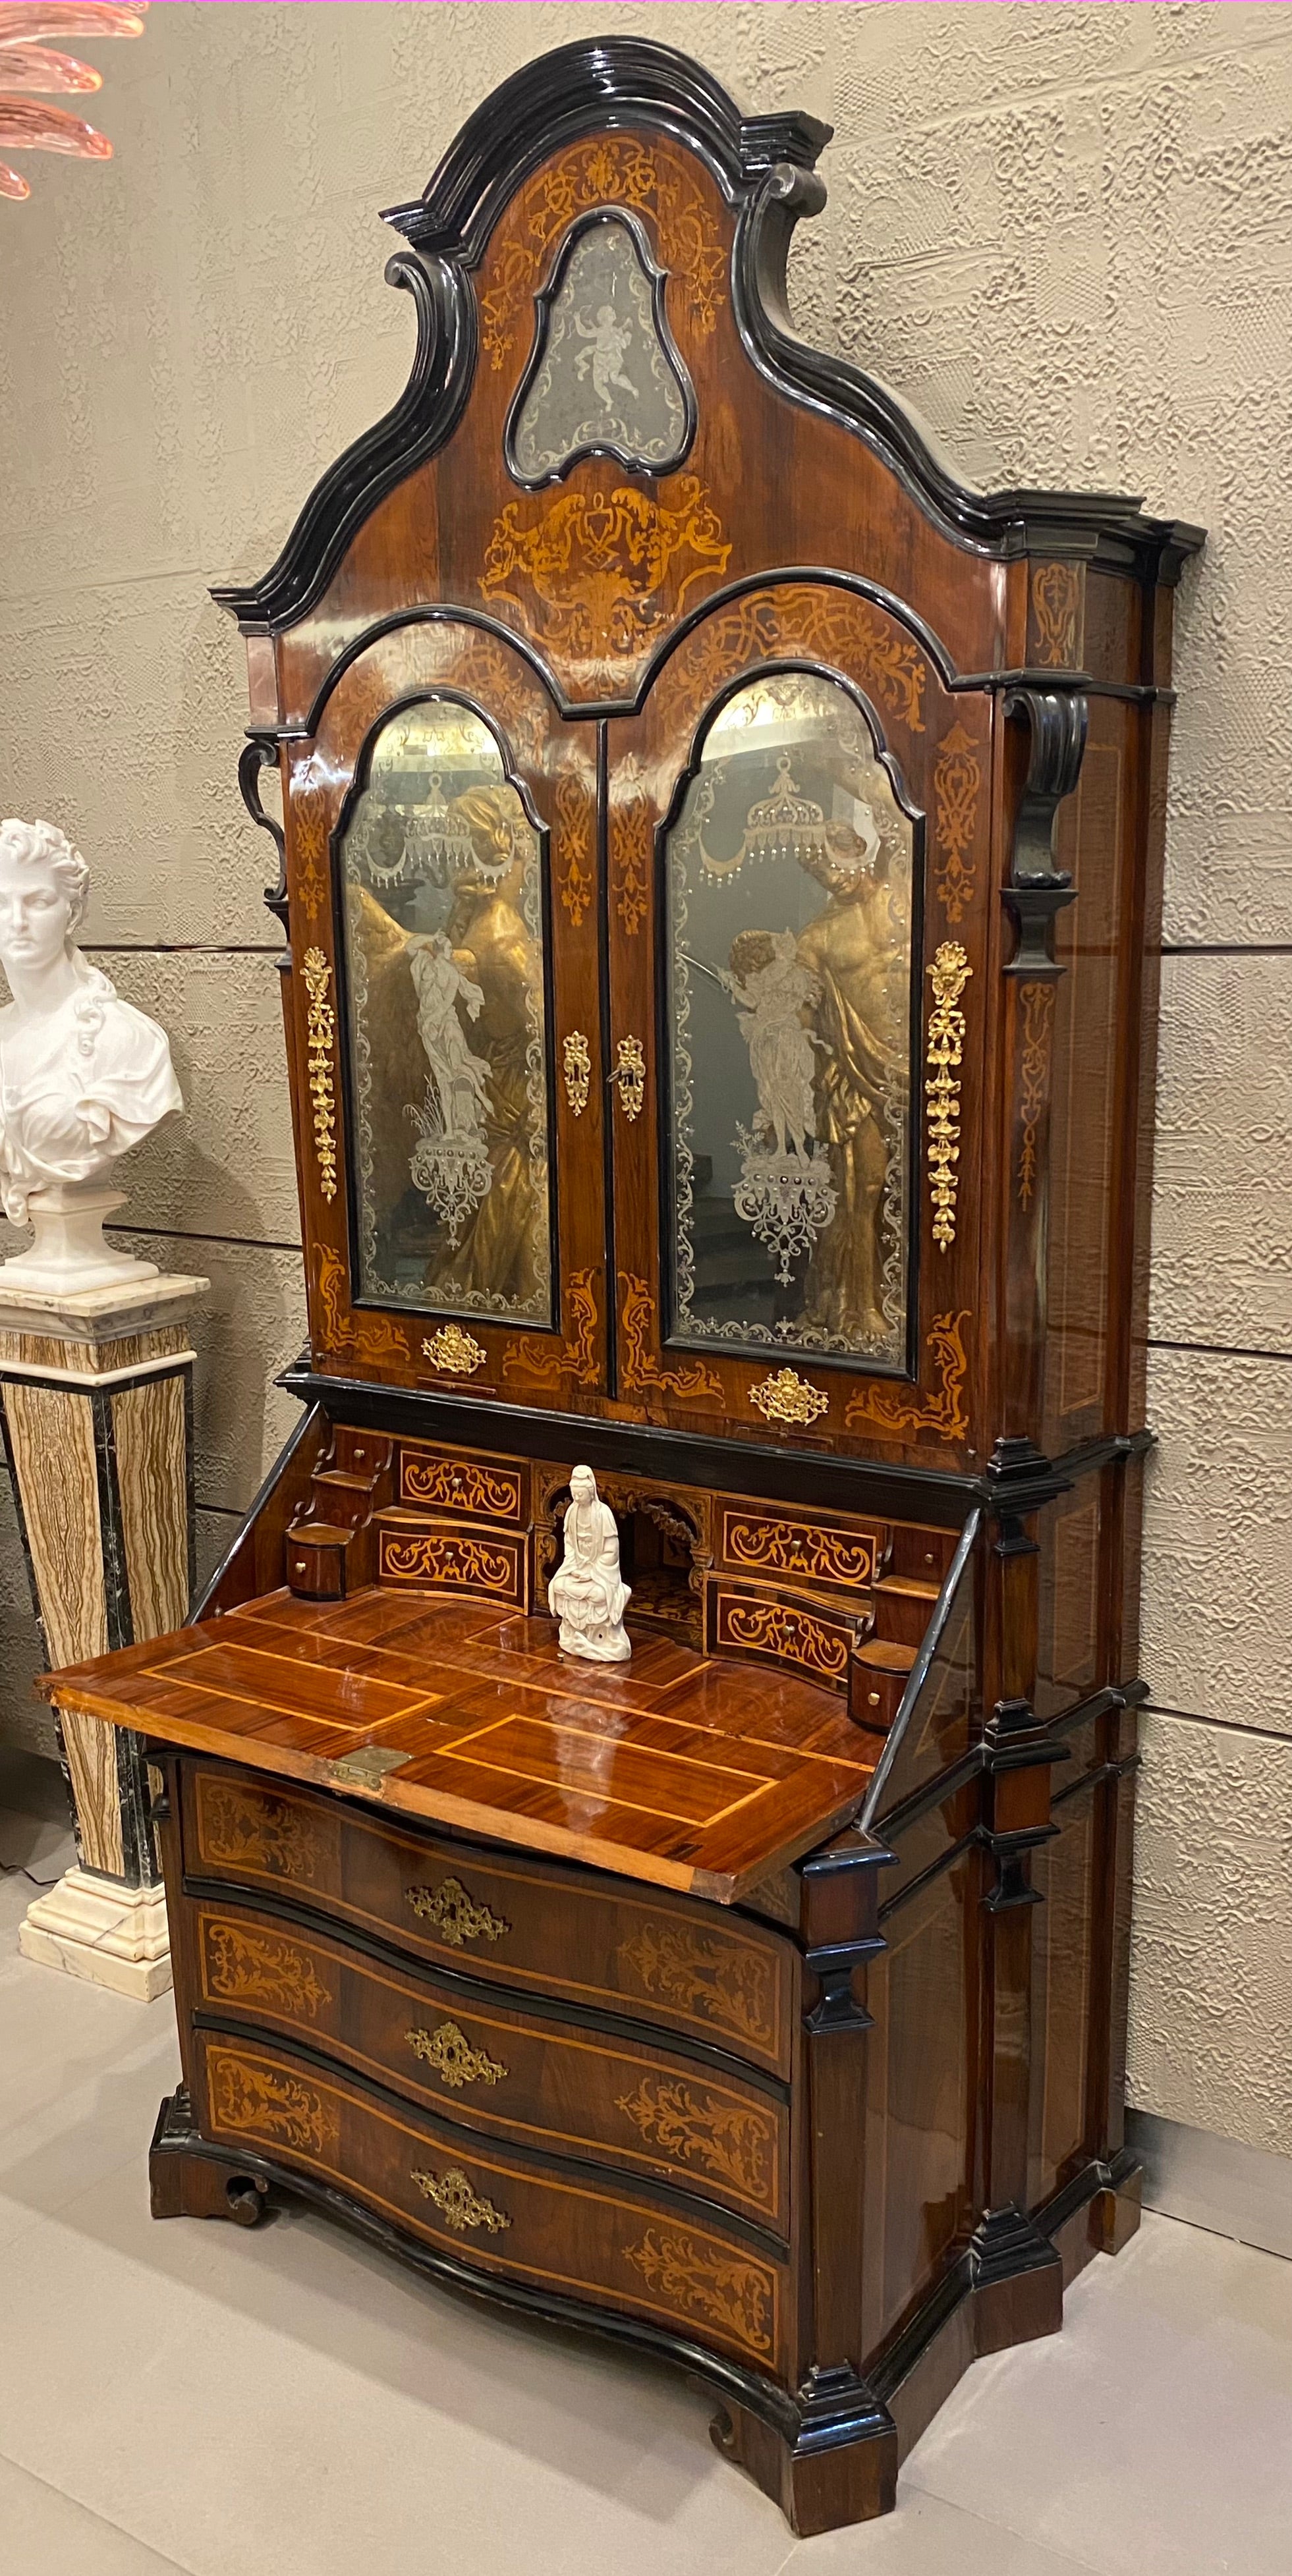 Outstanding Italian walnut, parquetry bureau cabinet fruitwood inlaid with scrolling foliage,
The upper section with a shaped carved cresting centered by a cartouche-shaped mirror with 
 engraved putto figure. Above a pair of mirrored doors,